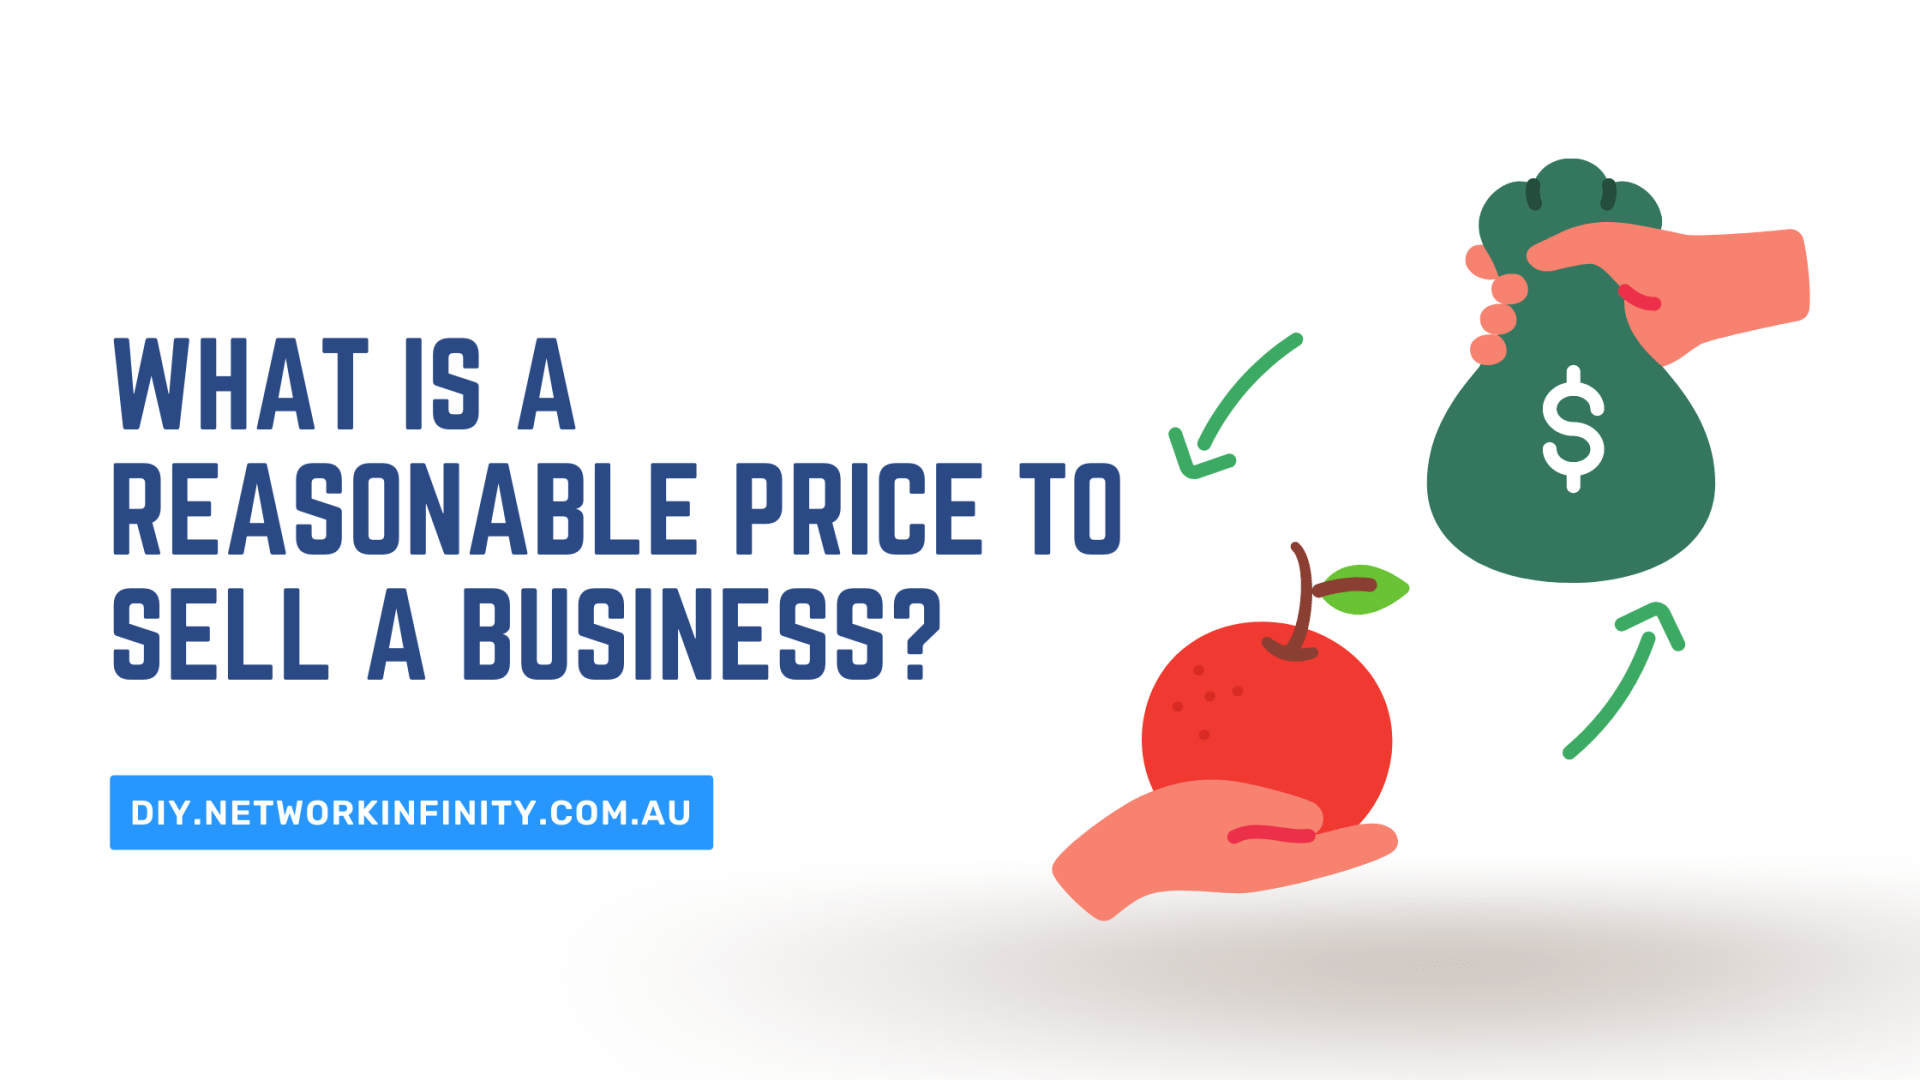 What Is A Reasonable Price To Sell A Business?